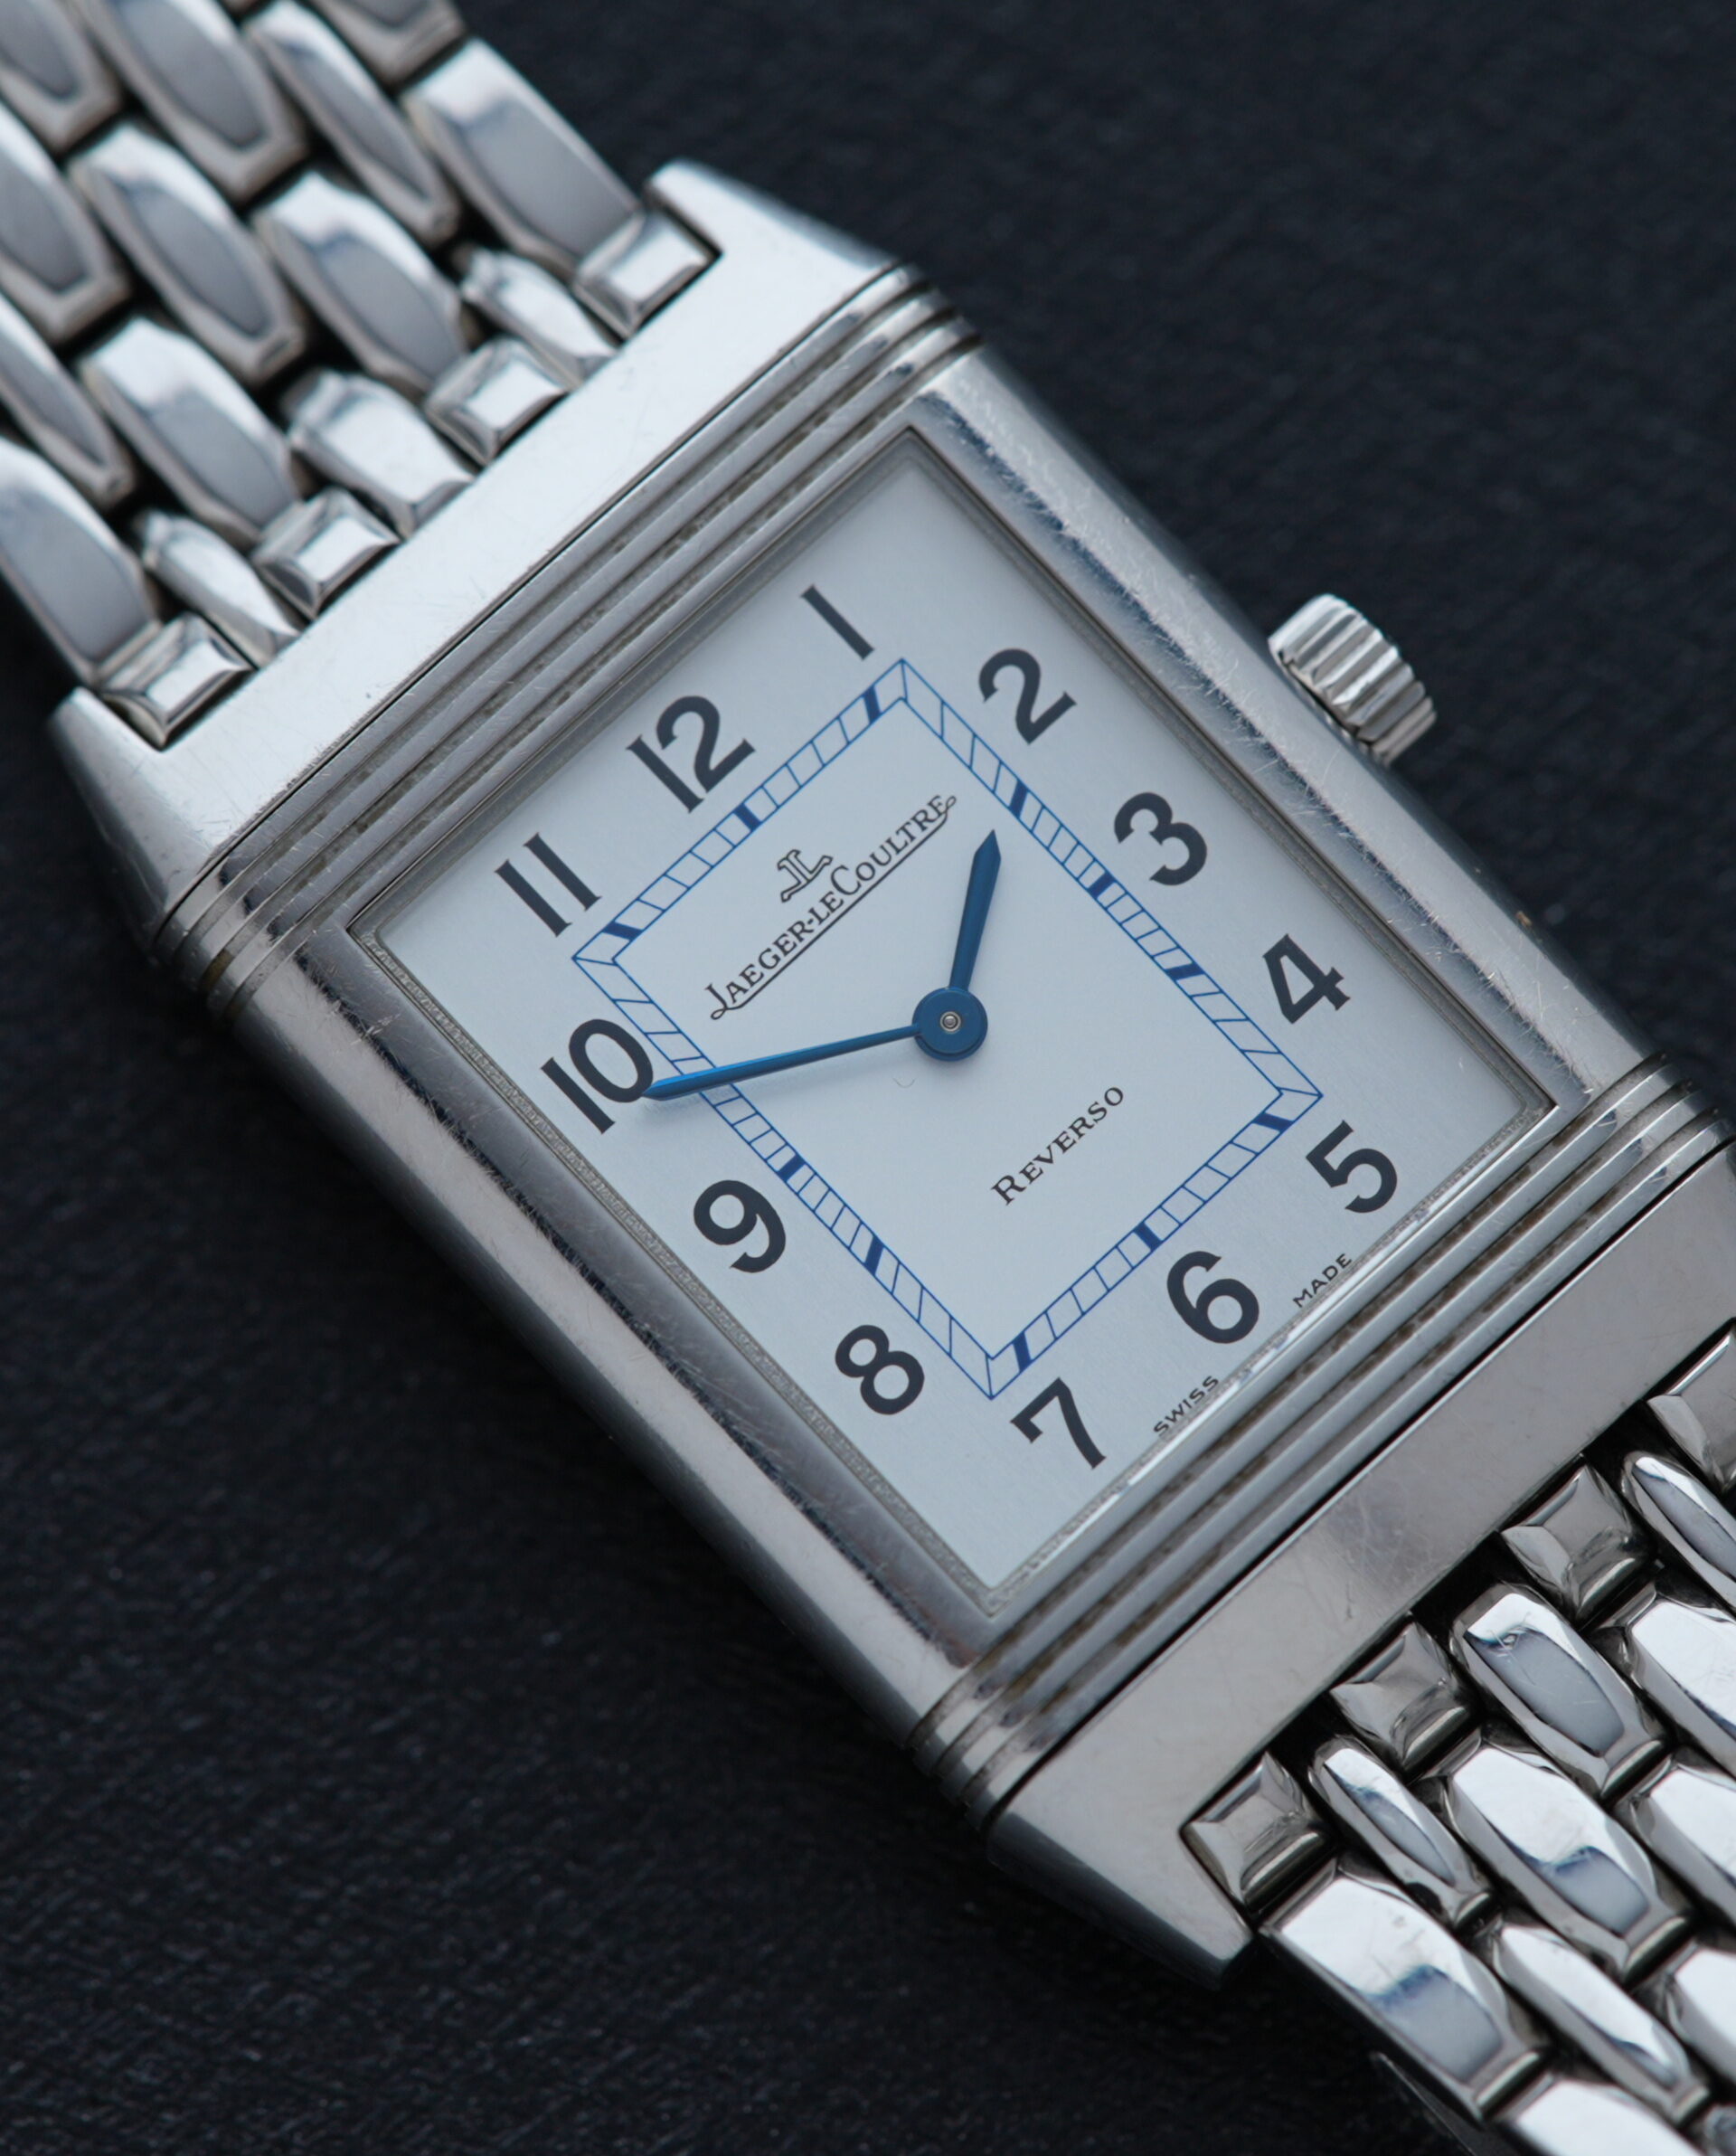 Jaeger-LeCoultre Reverso Classique 252.8.86 watch featured on an angle under white light.